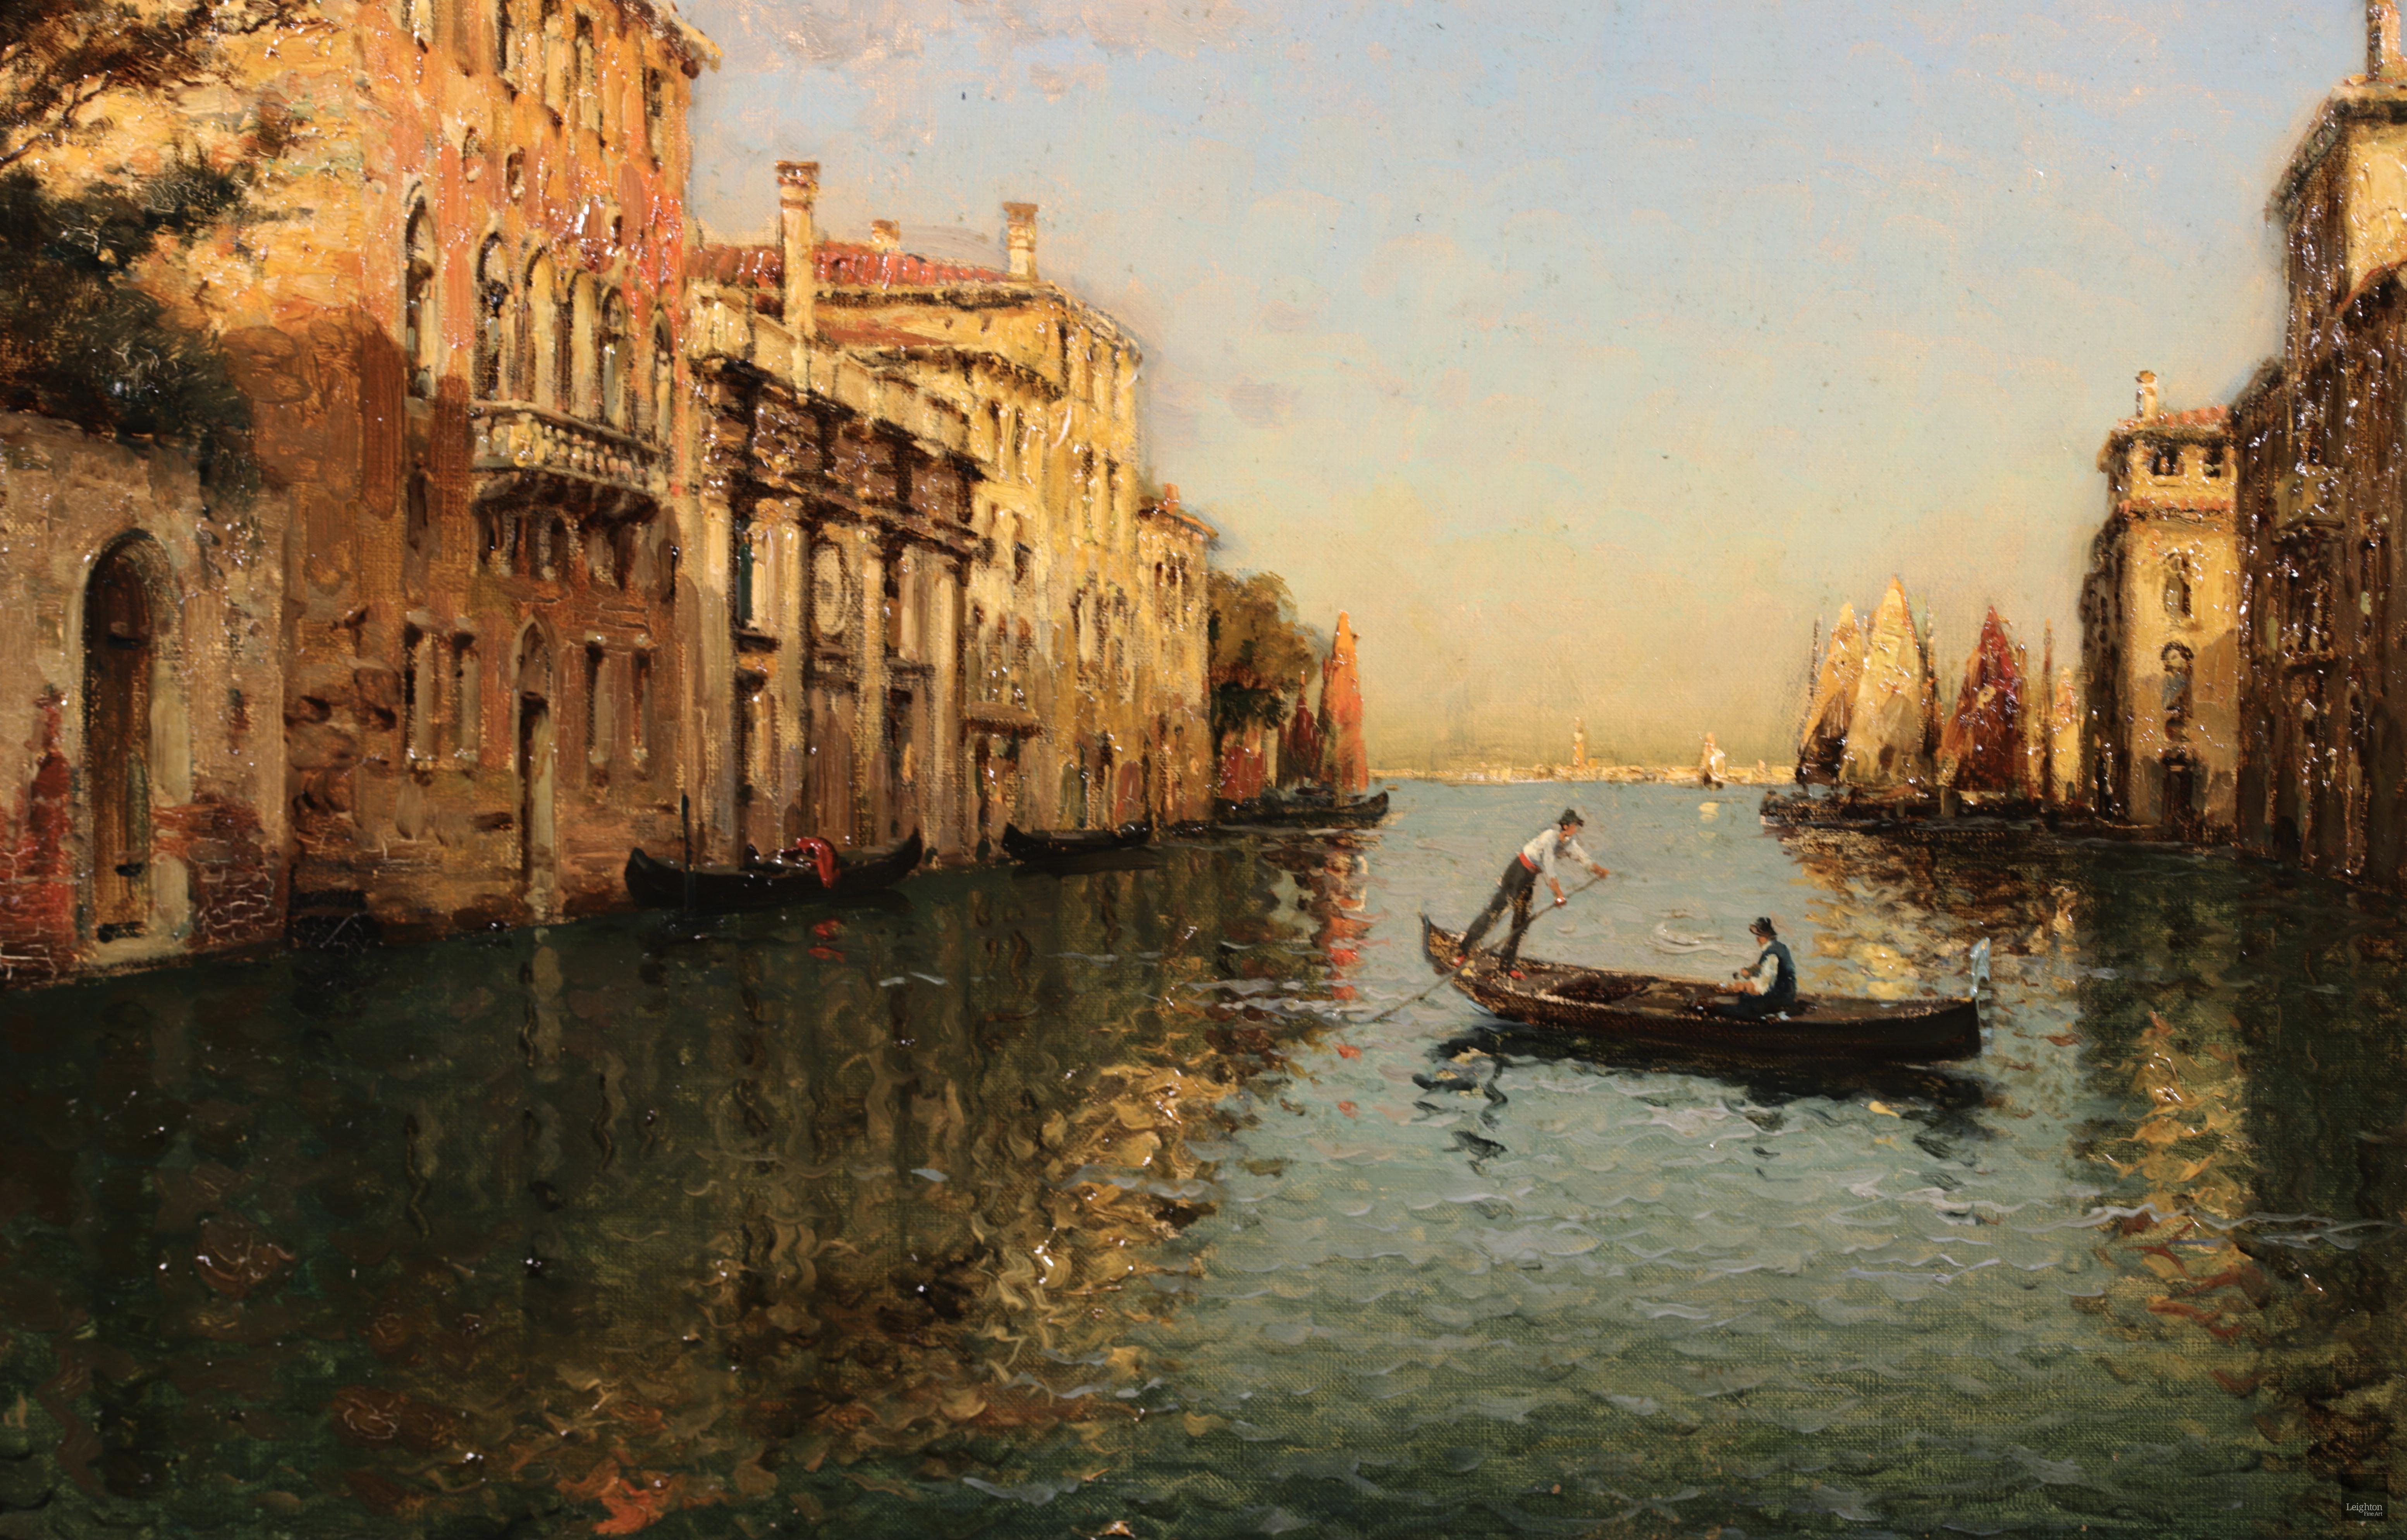 Gondoliers on a canal - Venice - Impressionist Oil, Landscape by Antoine Bouvard 4